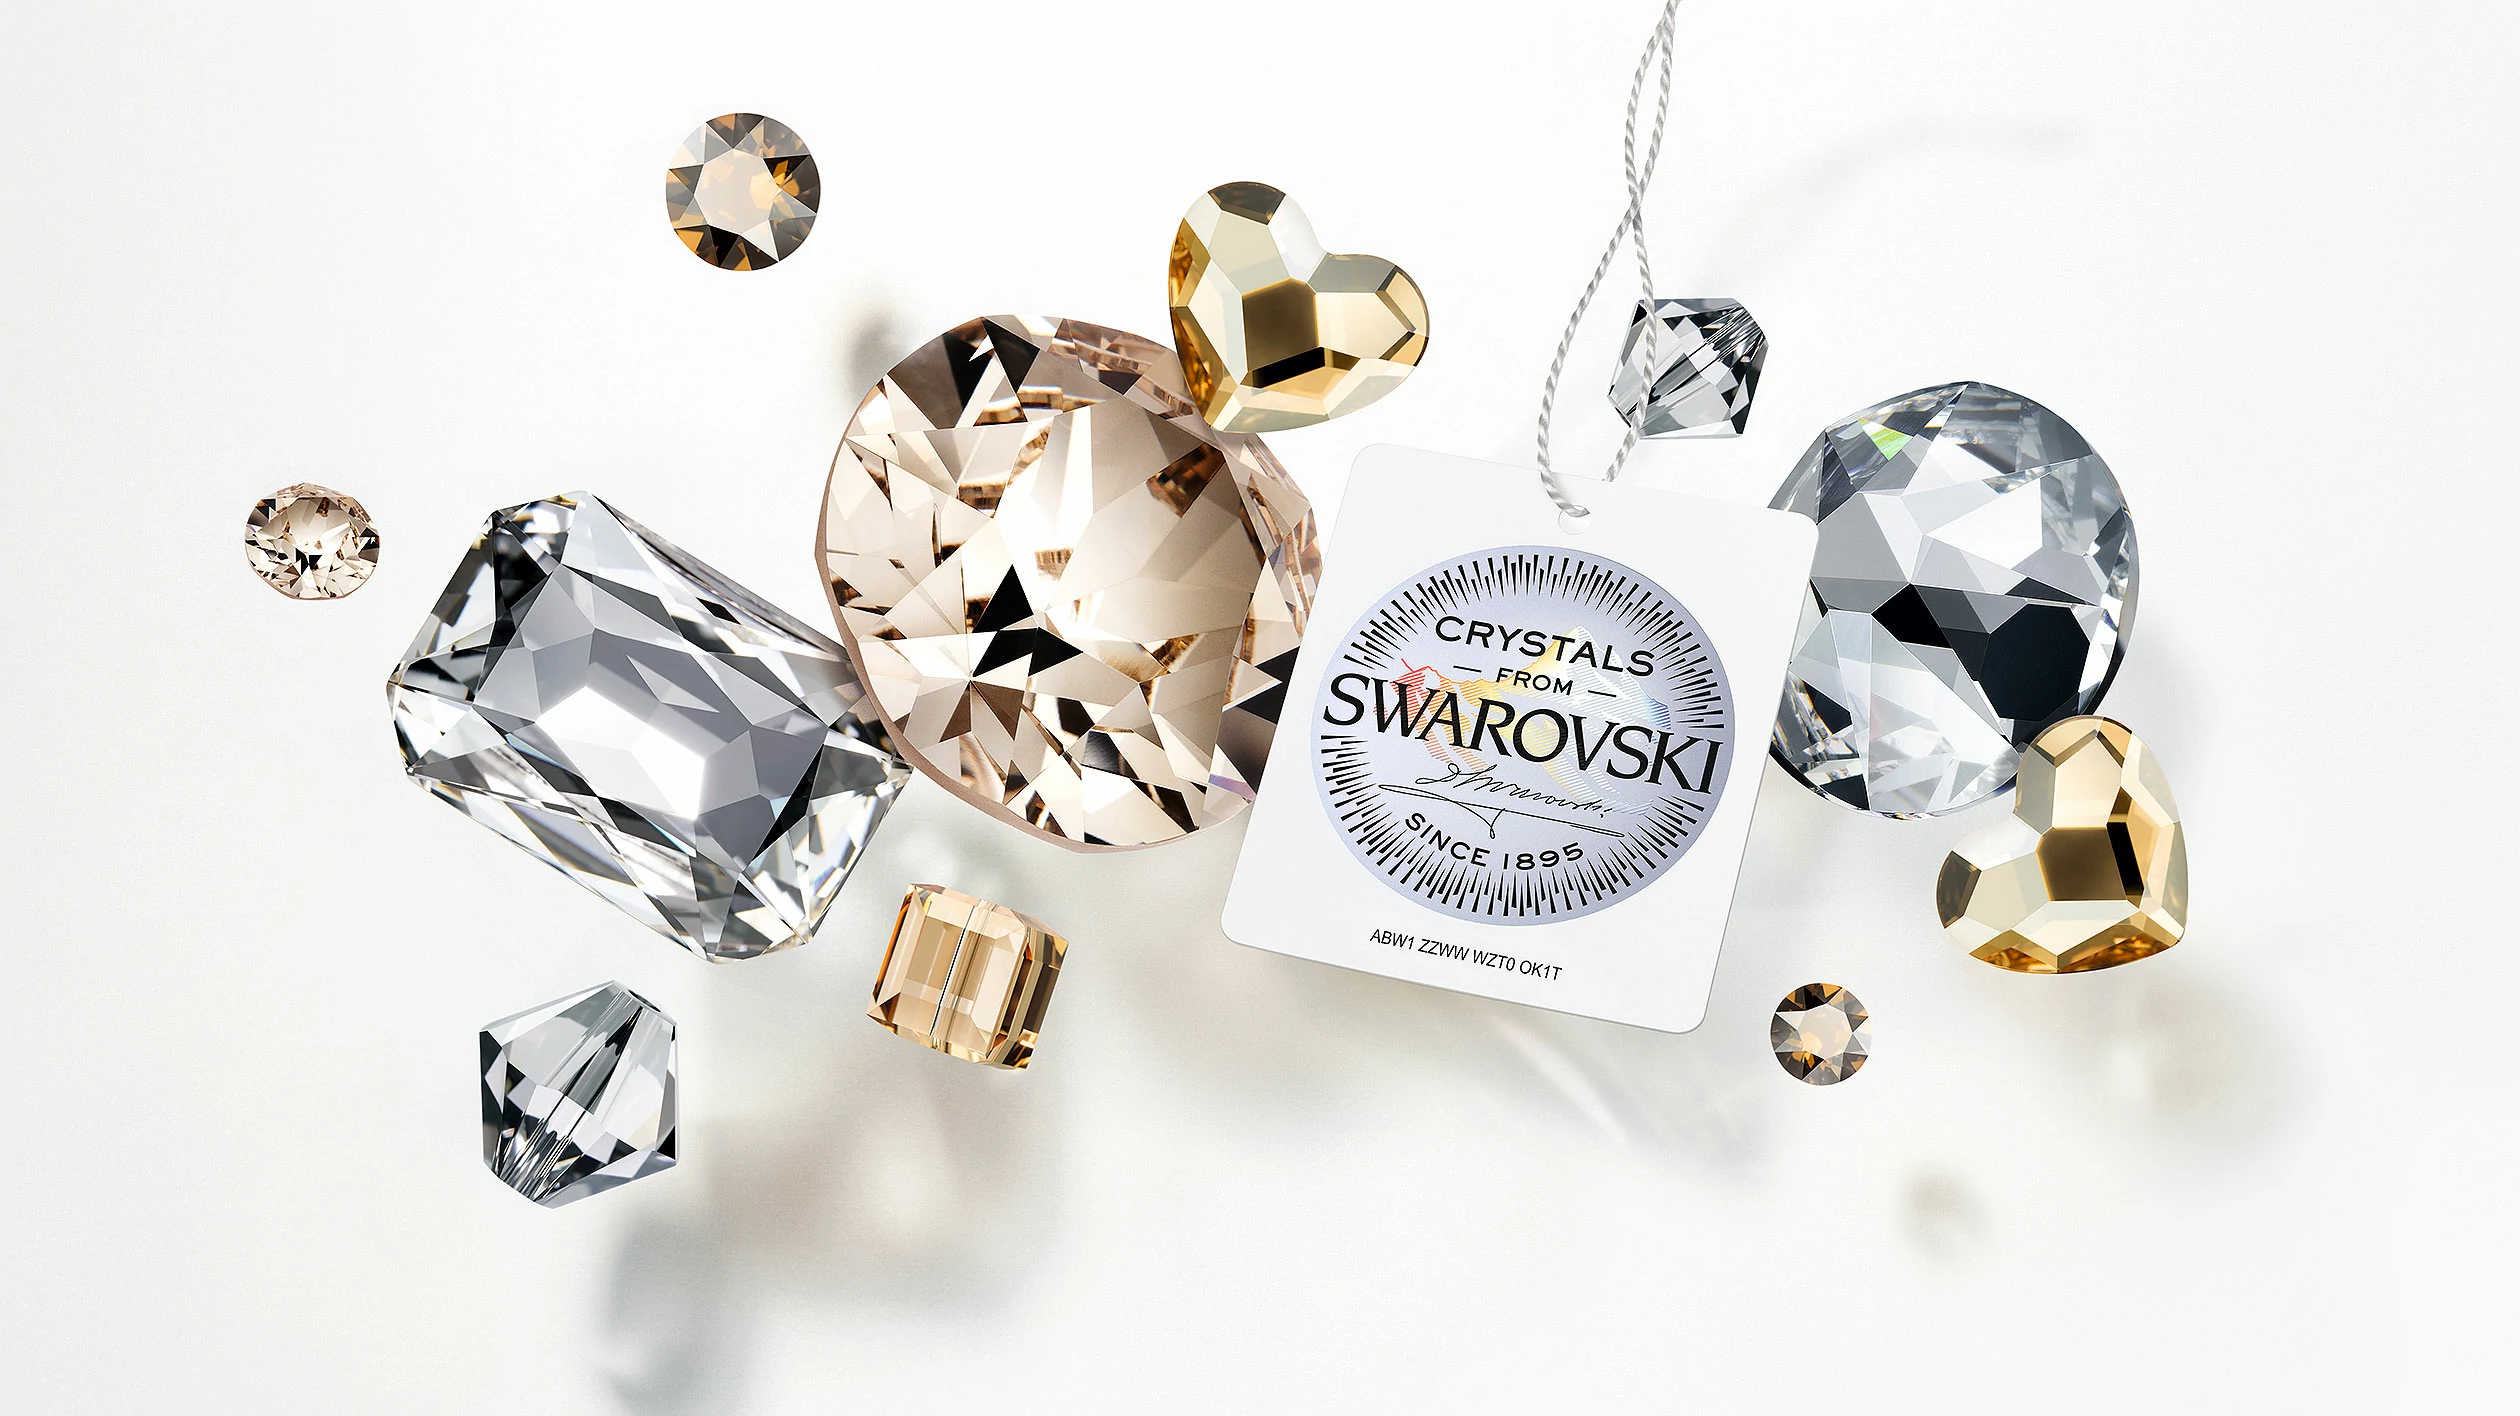 Various crystals with the "Crystals from Swarovski" authenticity tag 